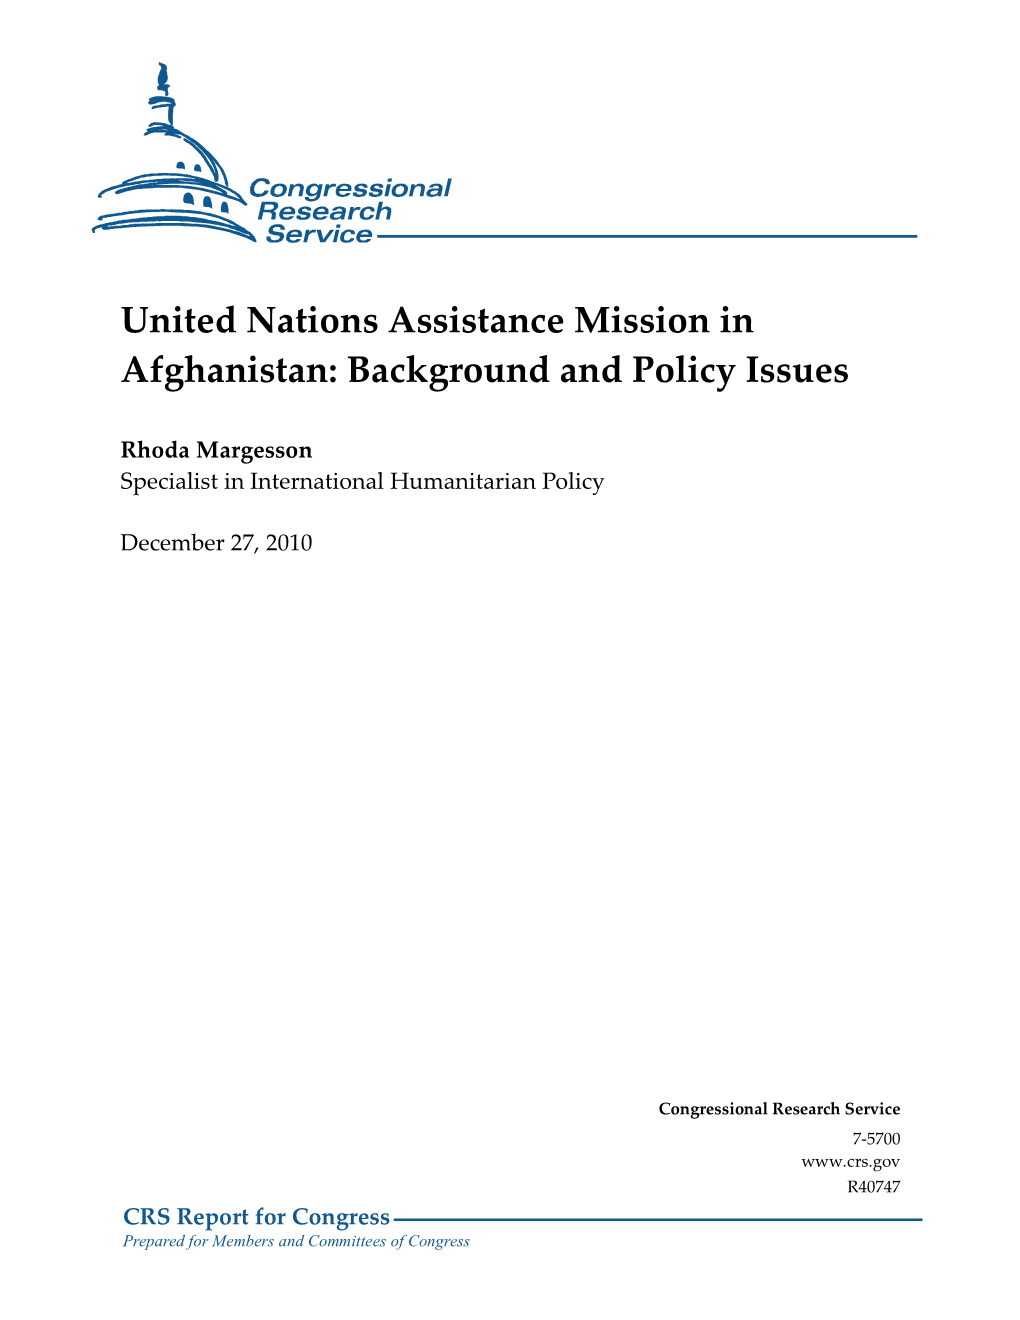 United Nations Assistance Mission in Afghanistan: Background and Policy Issues